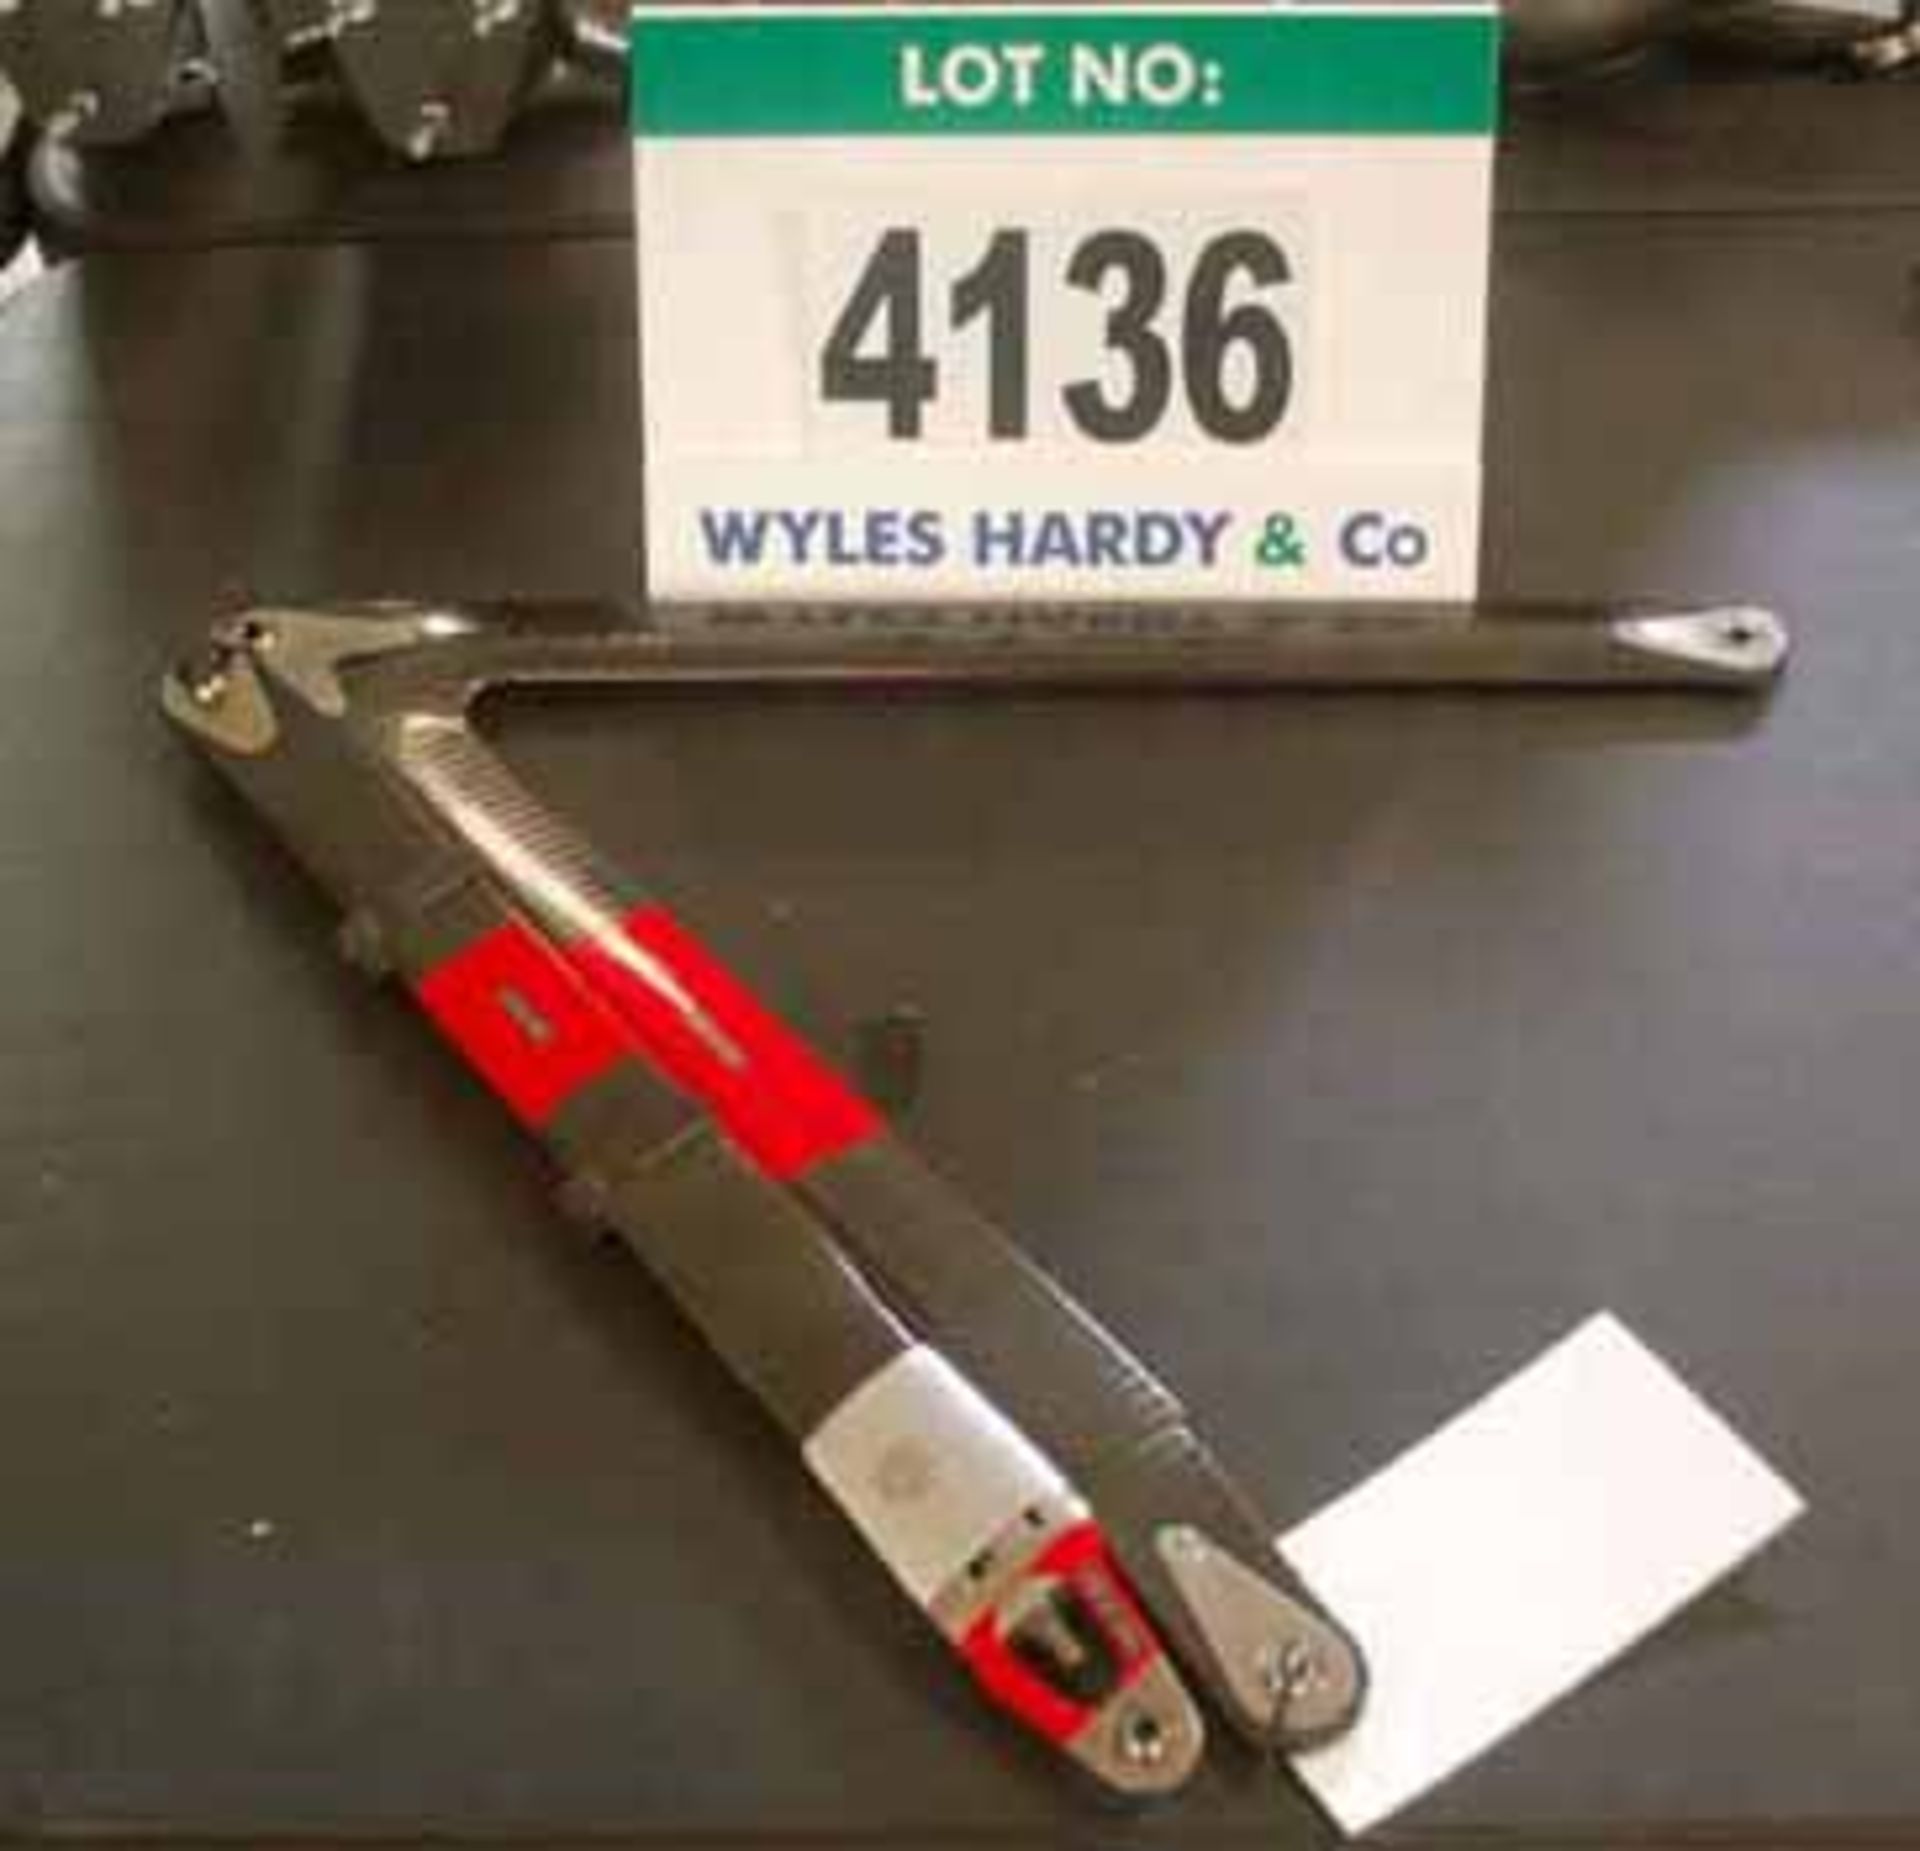 A CATERHAM F1 2012 Rear Left Wishbone & Track Rod (Want it Shipped? http://bit.ly/1wIhCEv)